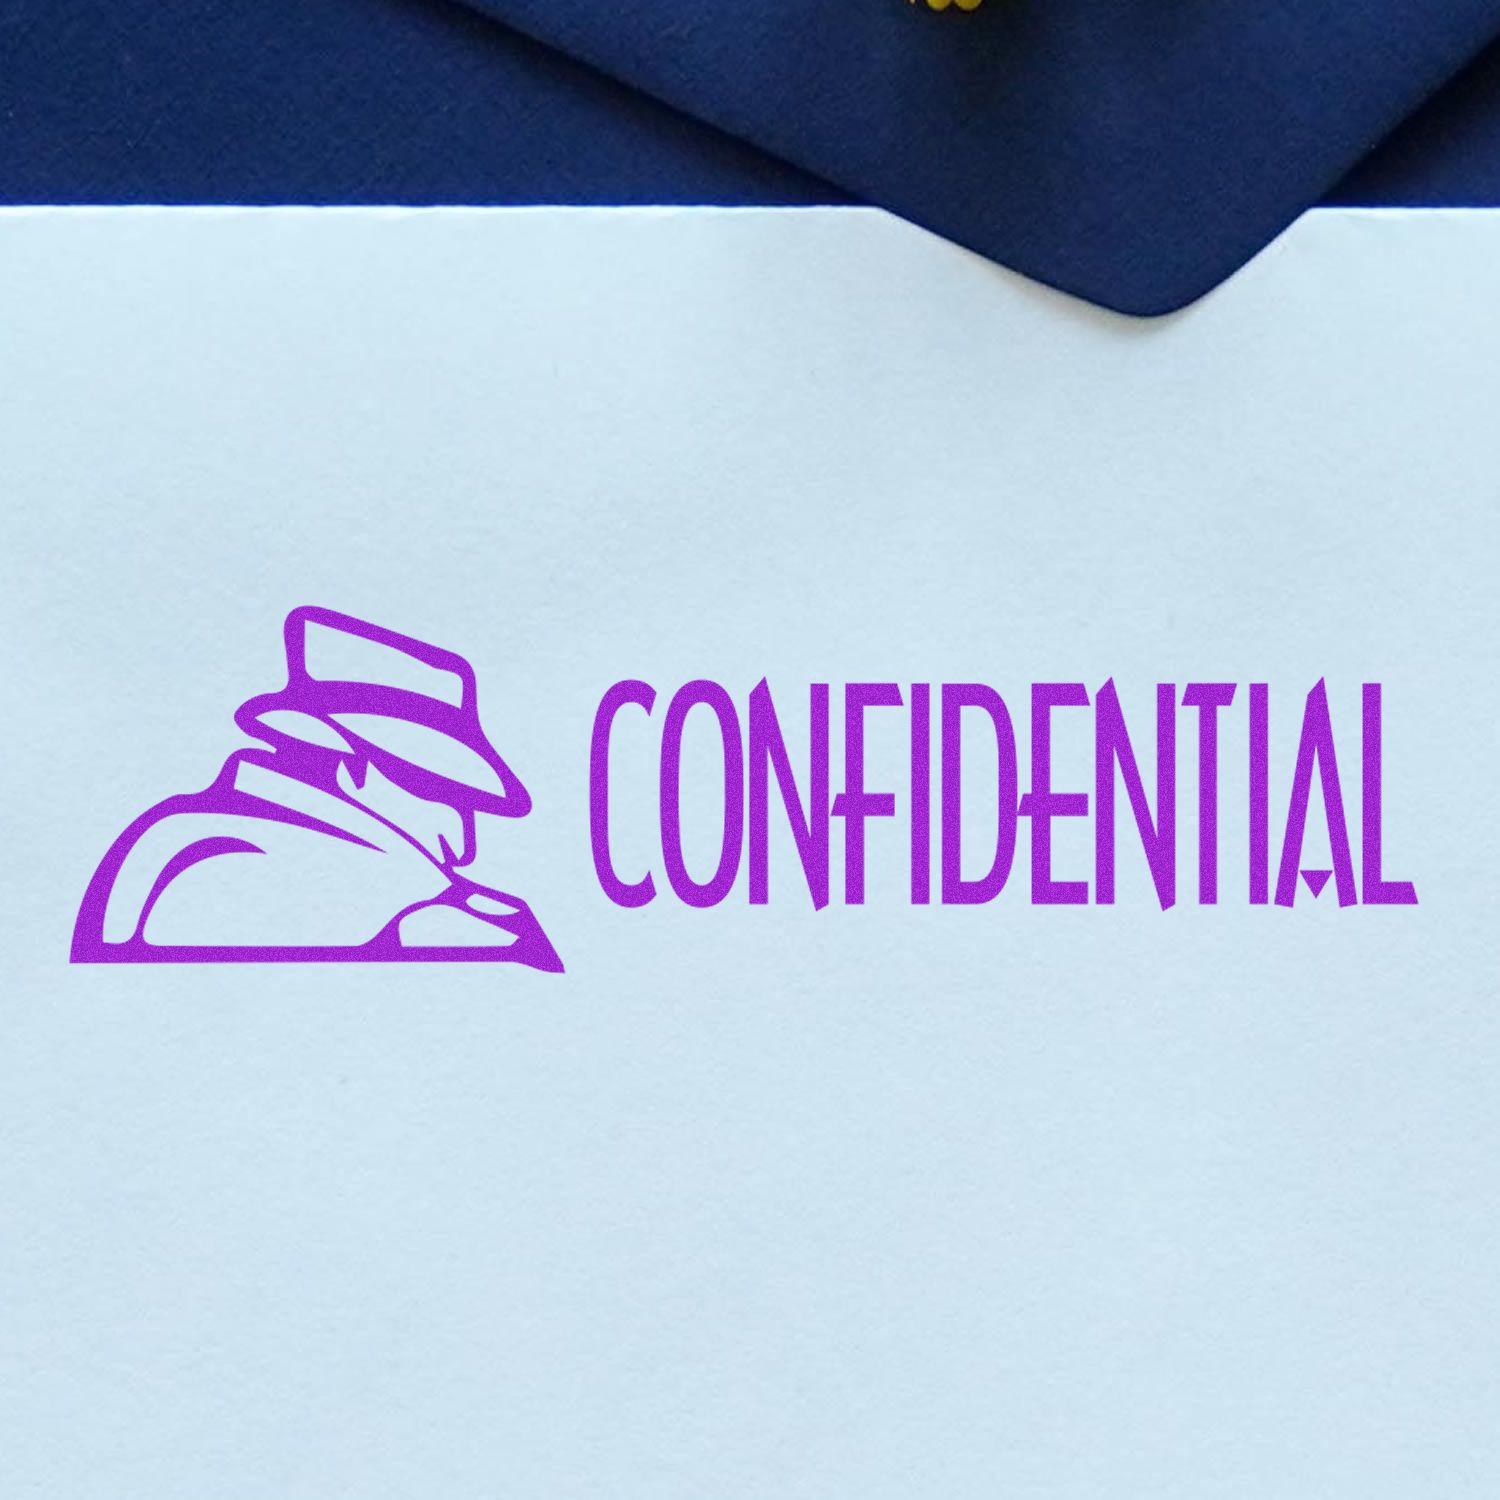 Confidential with Logo Rubber Stamp In Use